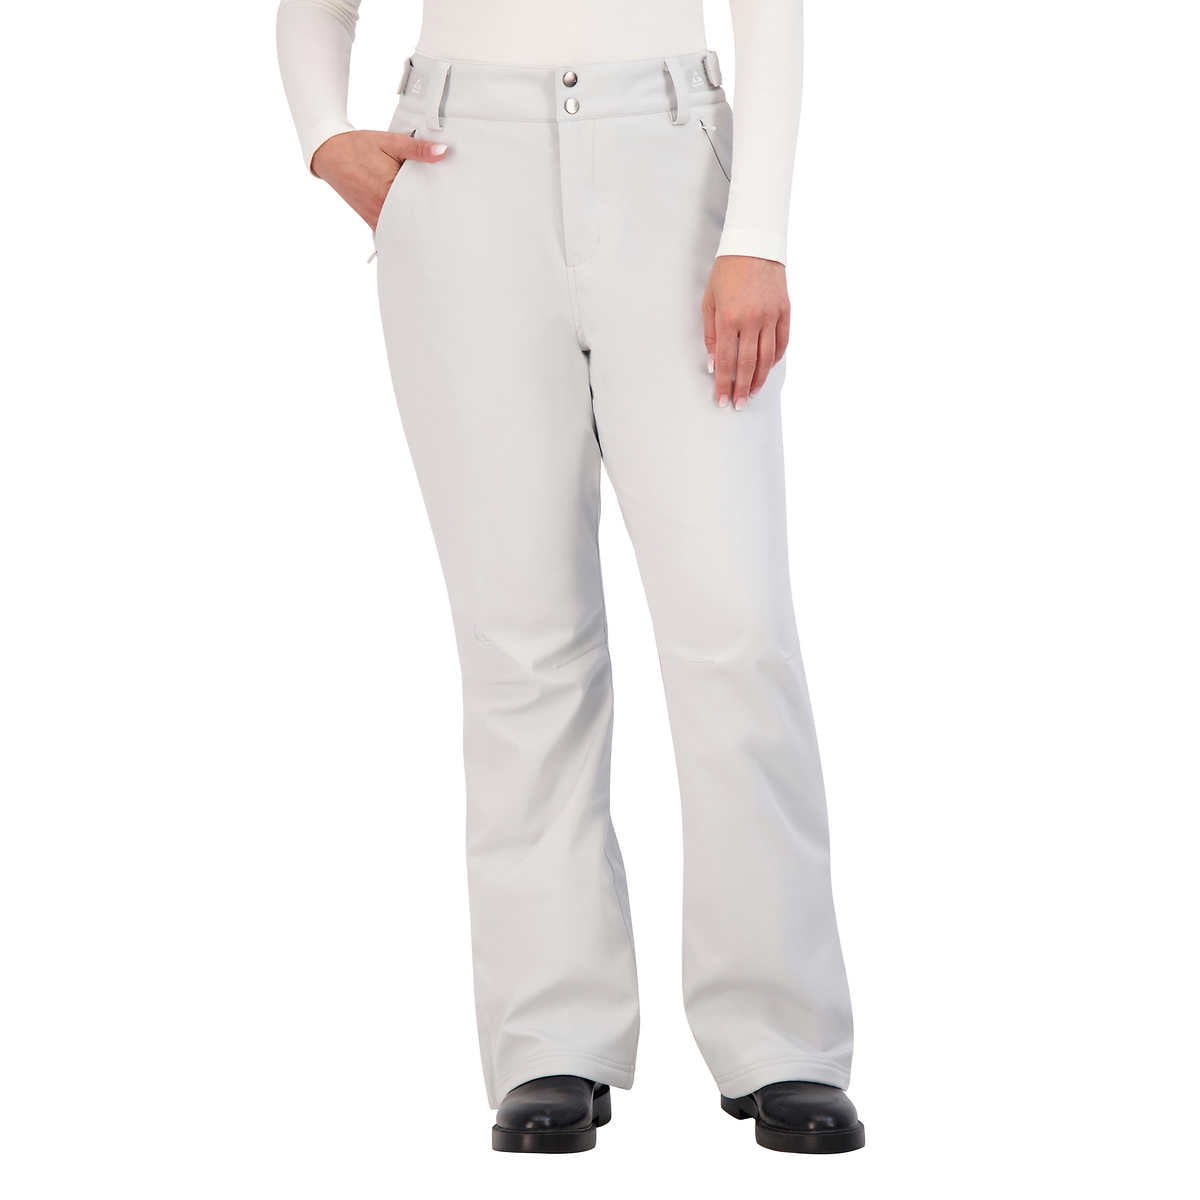 GERRY Women's 4-Way Stretch Water Resistant Fleece Lined Snow Pants CHOOSE  SIZE